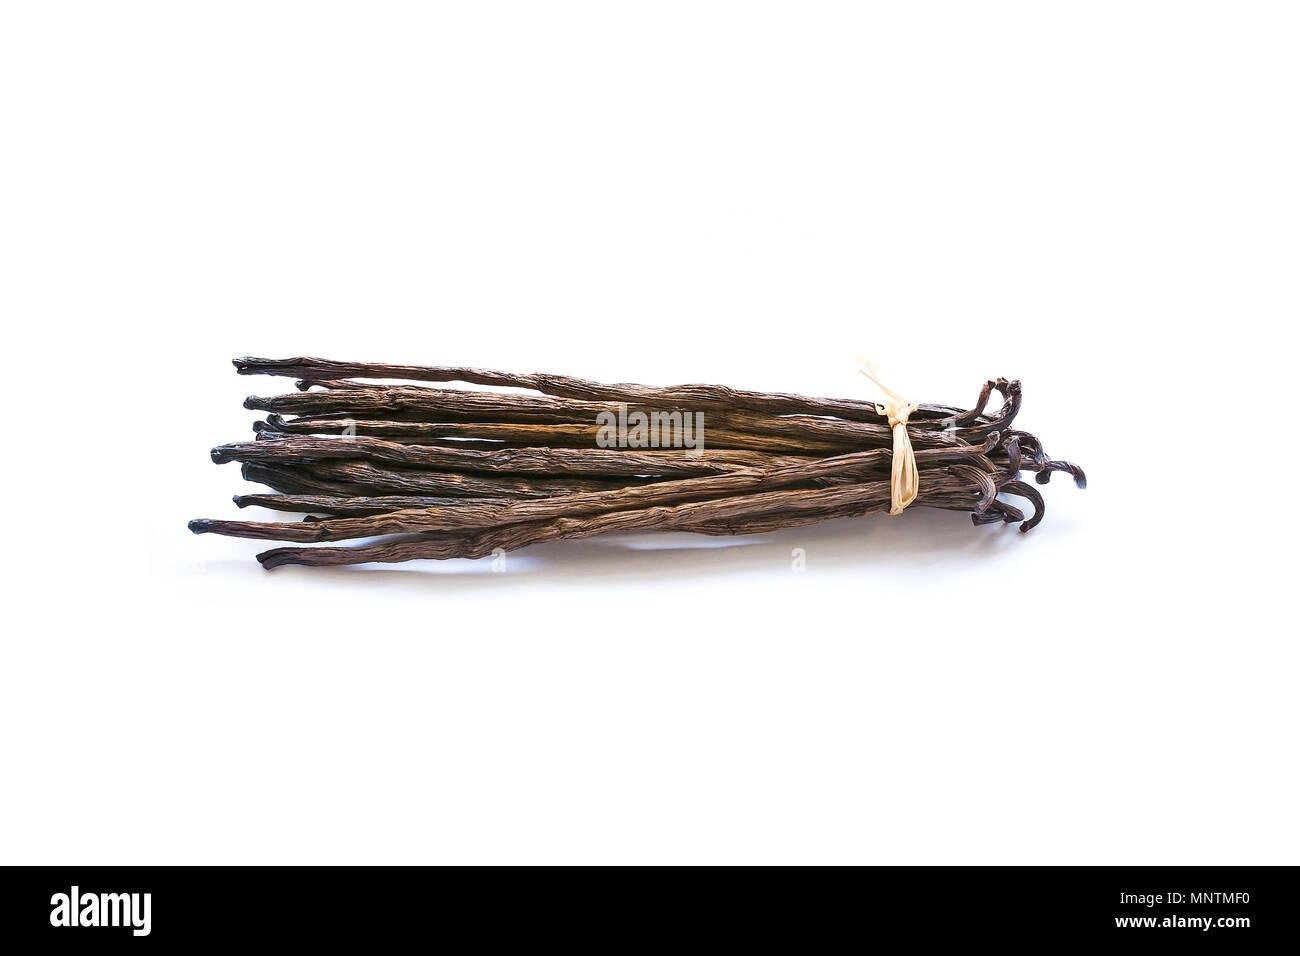 Vanilla pods with straw bow isolated on white. Stock Photo